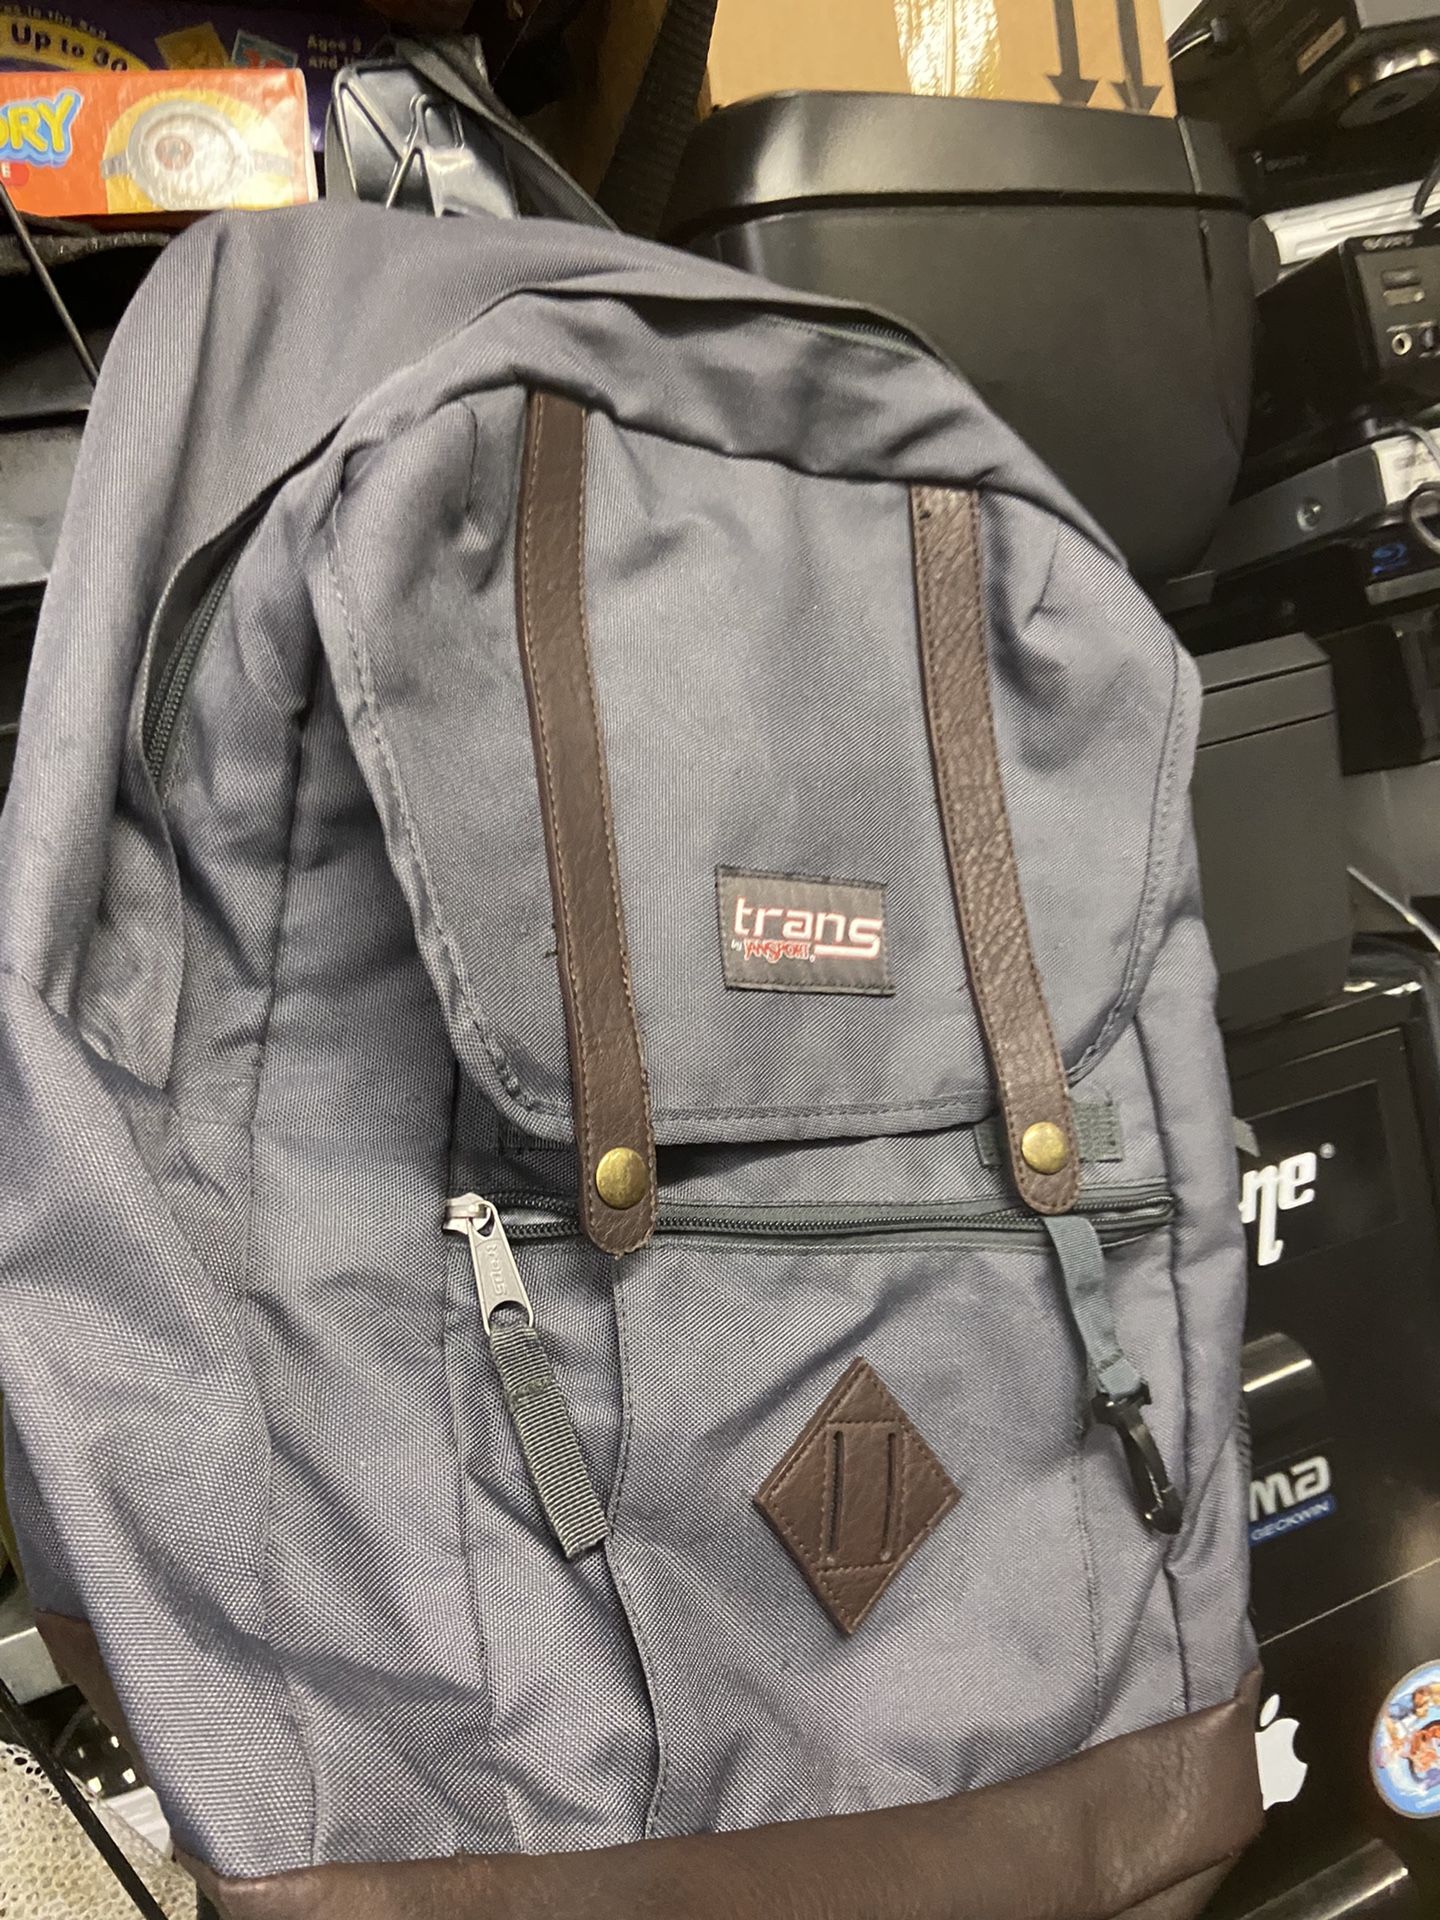 Trans by jansport Backpack